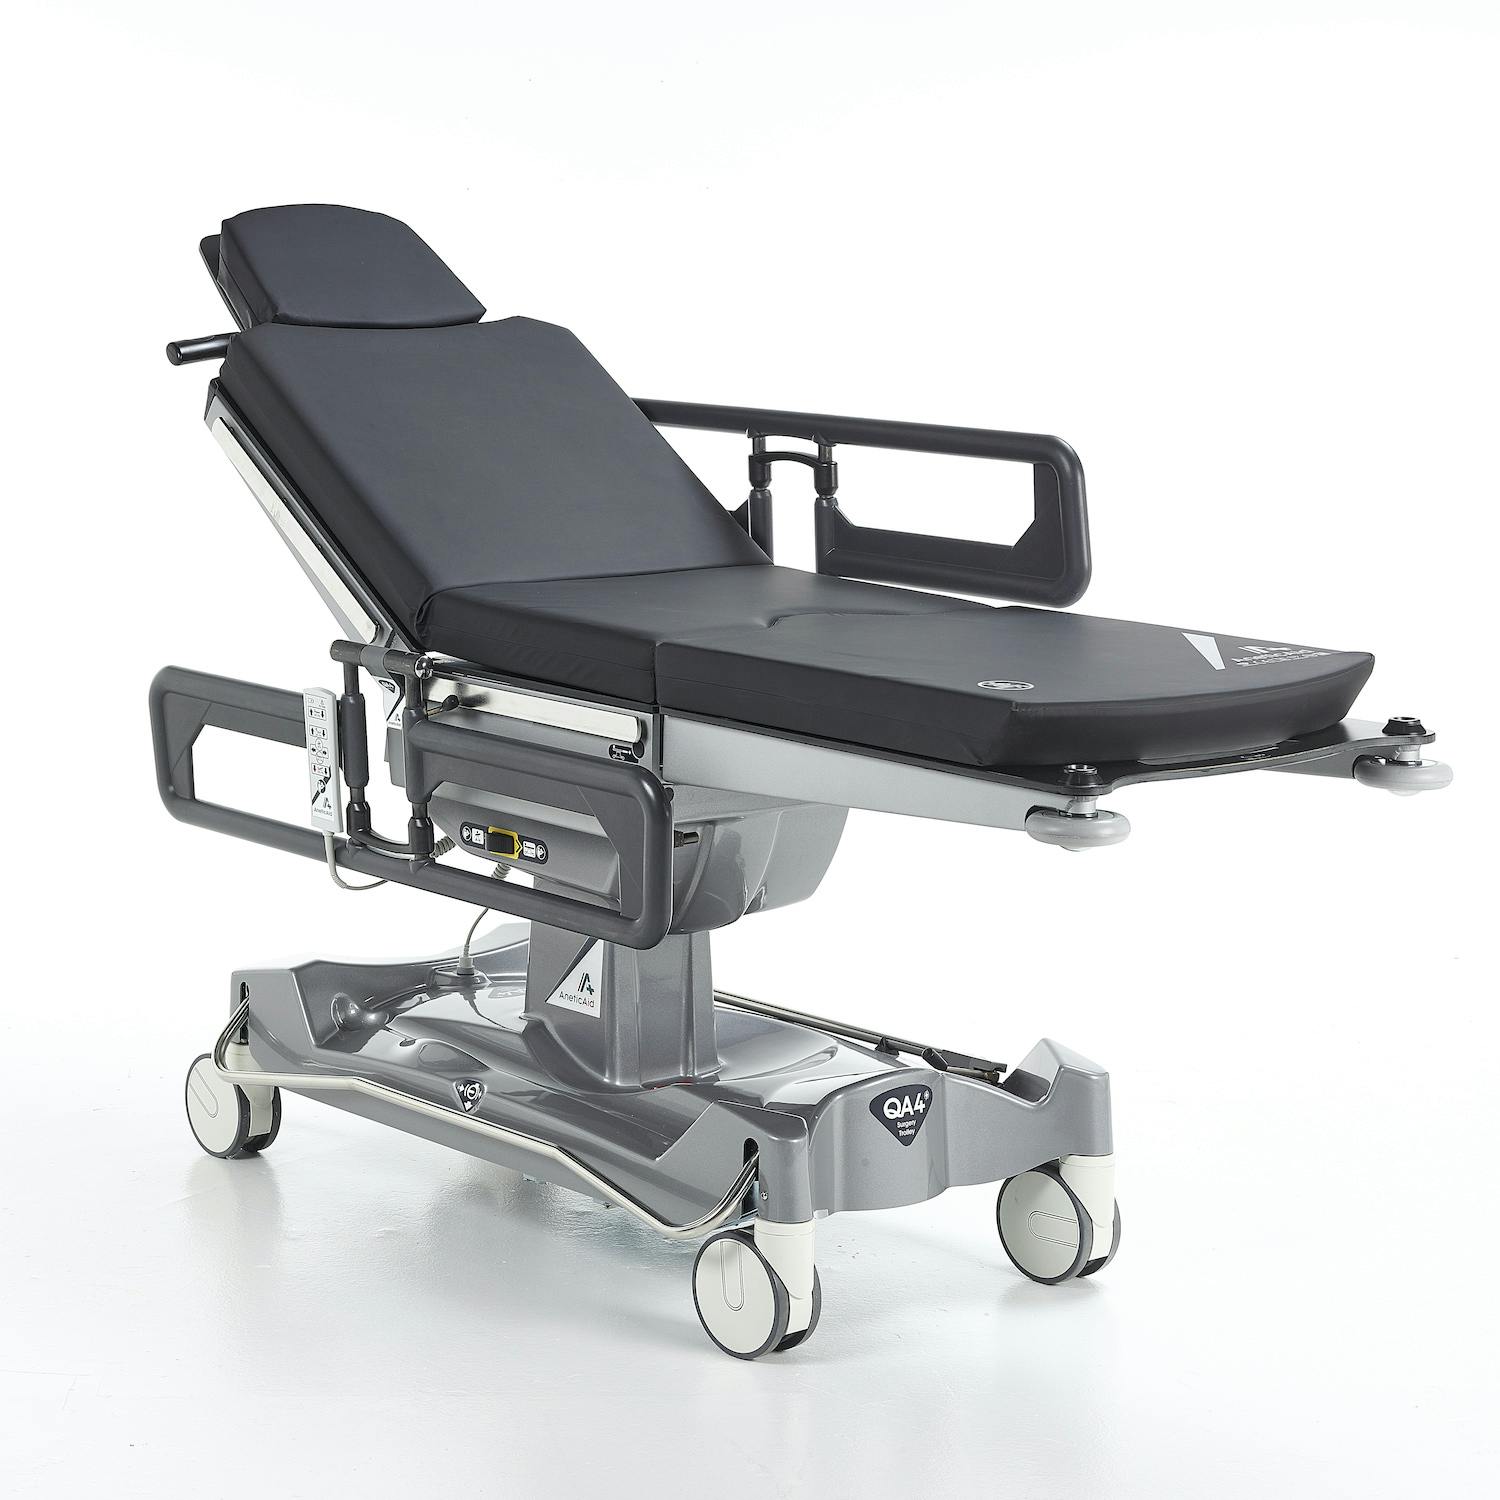 QA4™ Mobile Surgery System - with Powered Functions